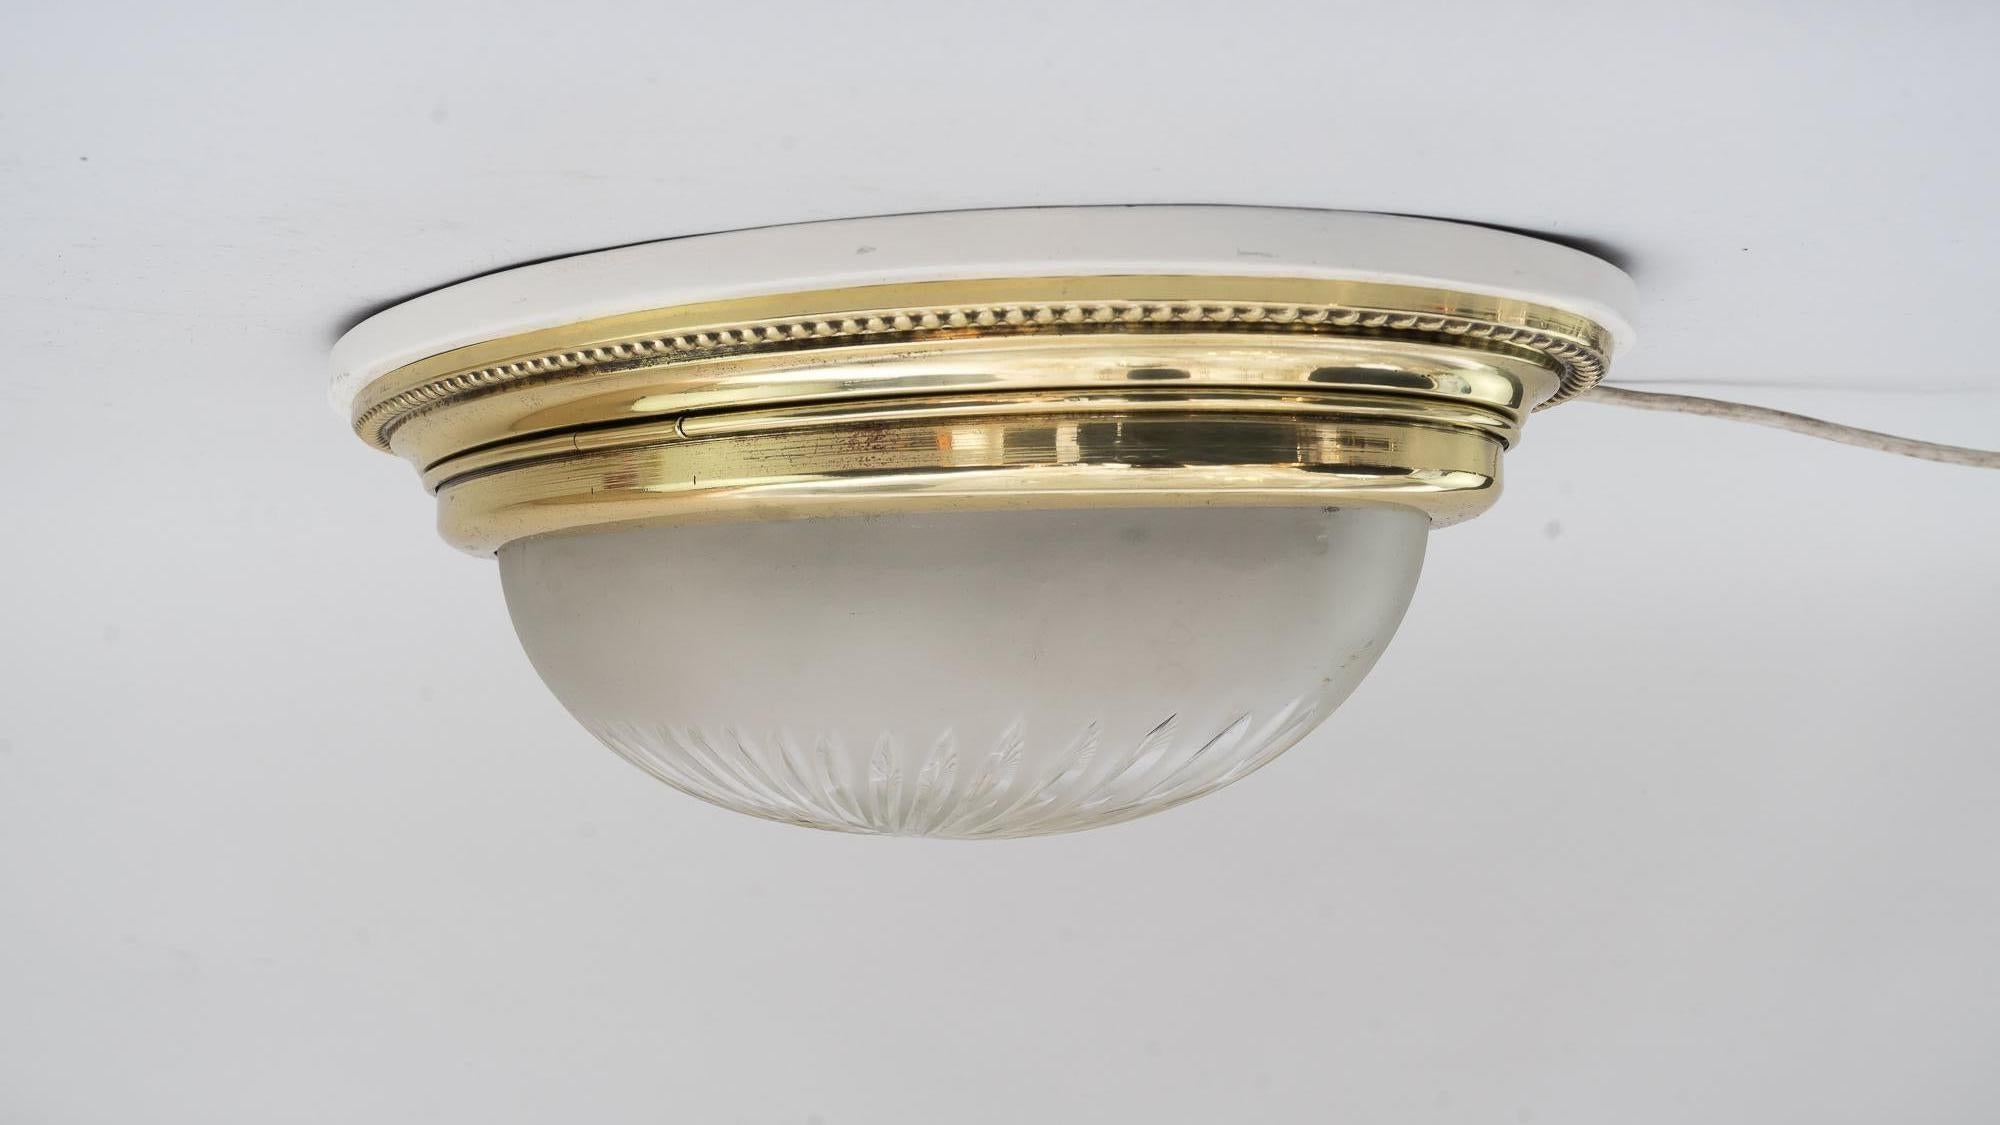 Polished Oval Art Deco Ceiling Lamp with Original Cut Glass and Wood Plate, 1920s